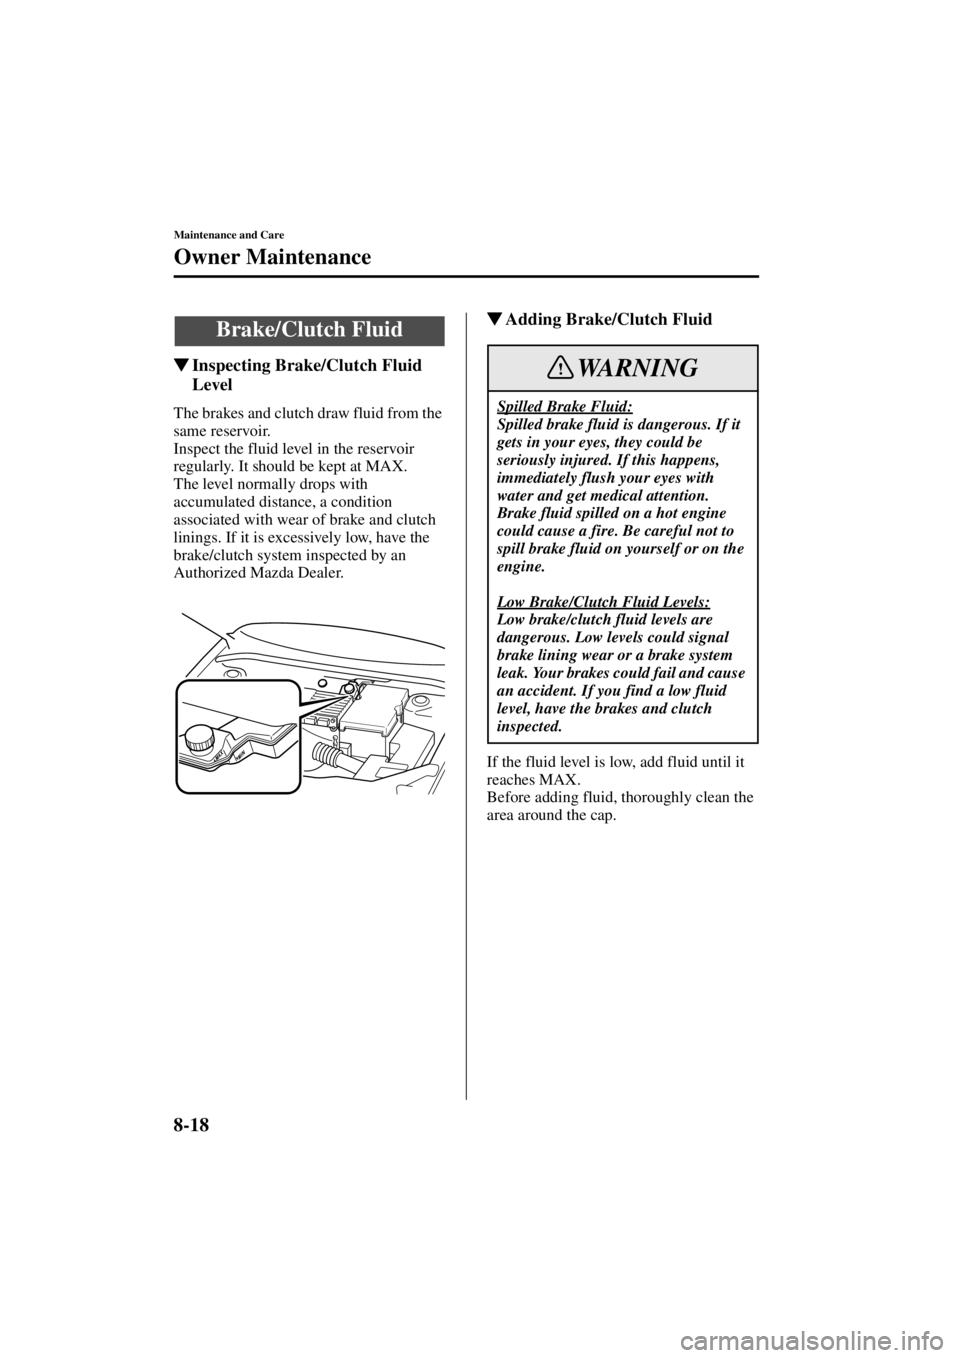 MAZDA MODEL 3 4-DOOR 2004  Owners Manual 8-18
Maintenance and Care
Owner Maintenance
Form No. 8S18-EA-03I
Inspecting Brake/Clutch Fluid 
Level
The brakes and clutch draw fluid from the 
same reservoir.
Inspect the fluid level in the reservo